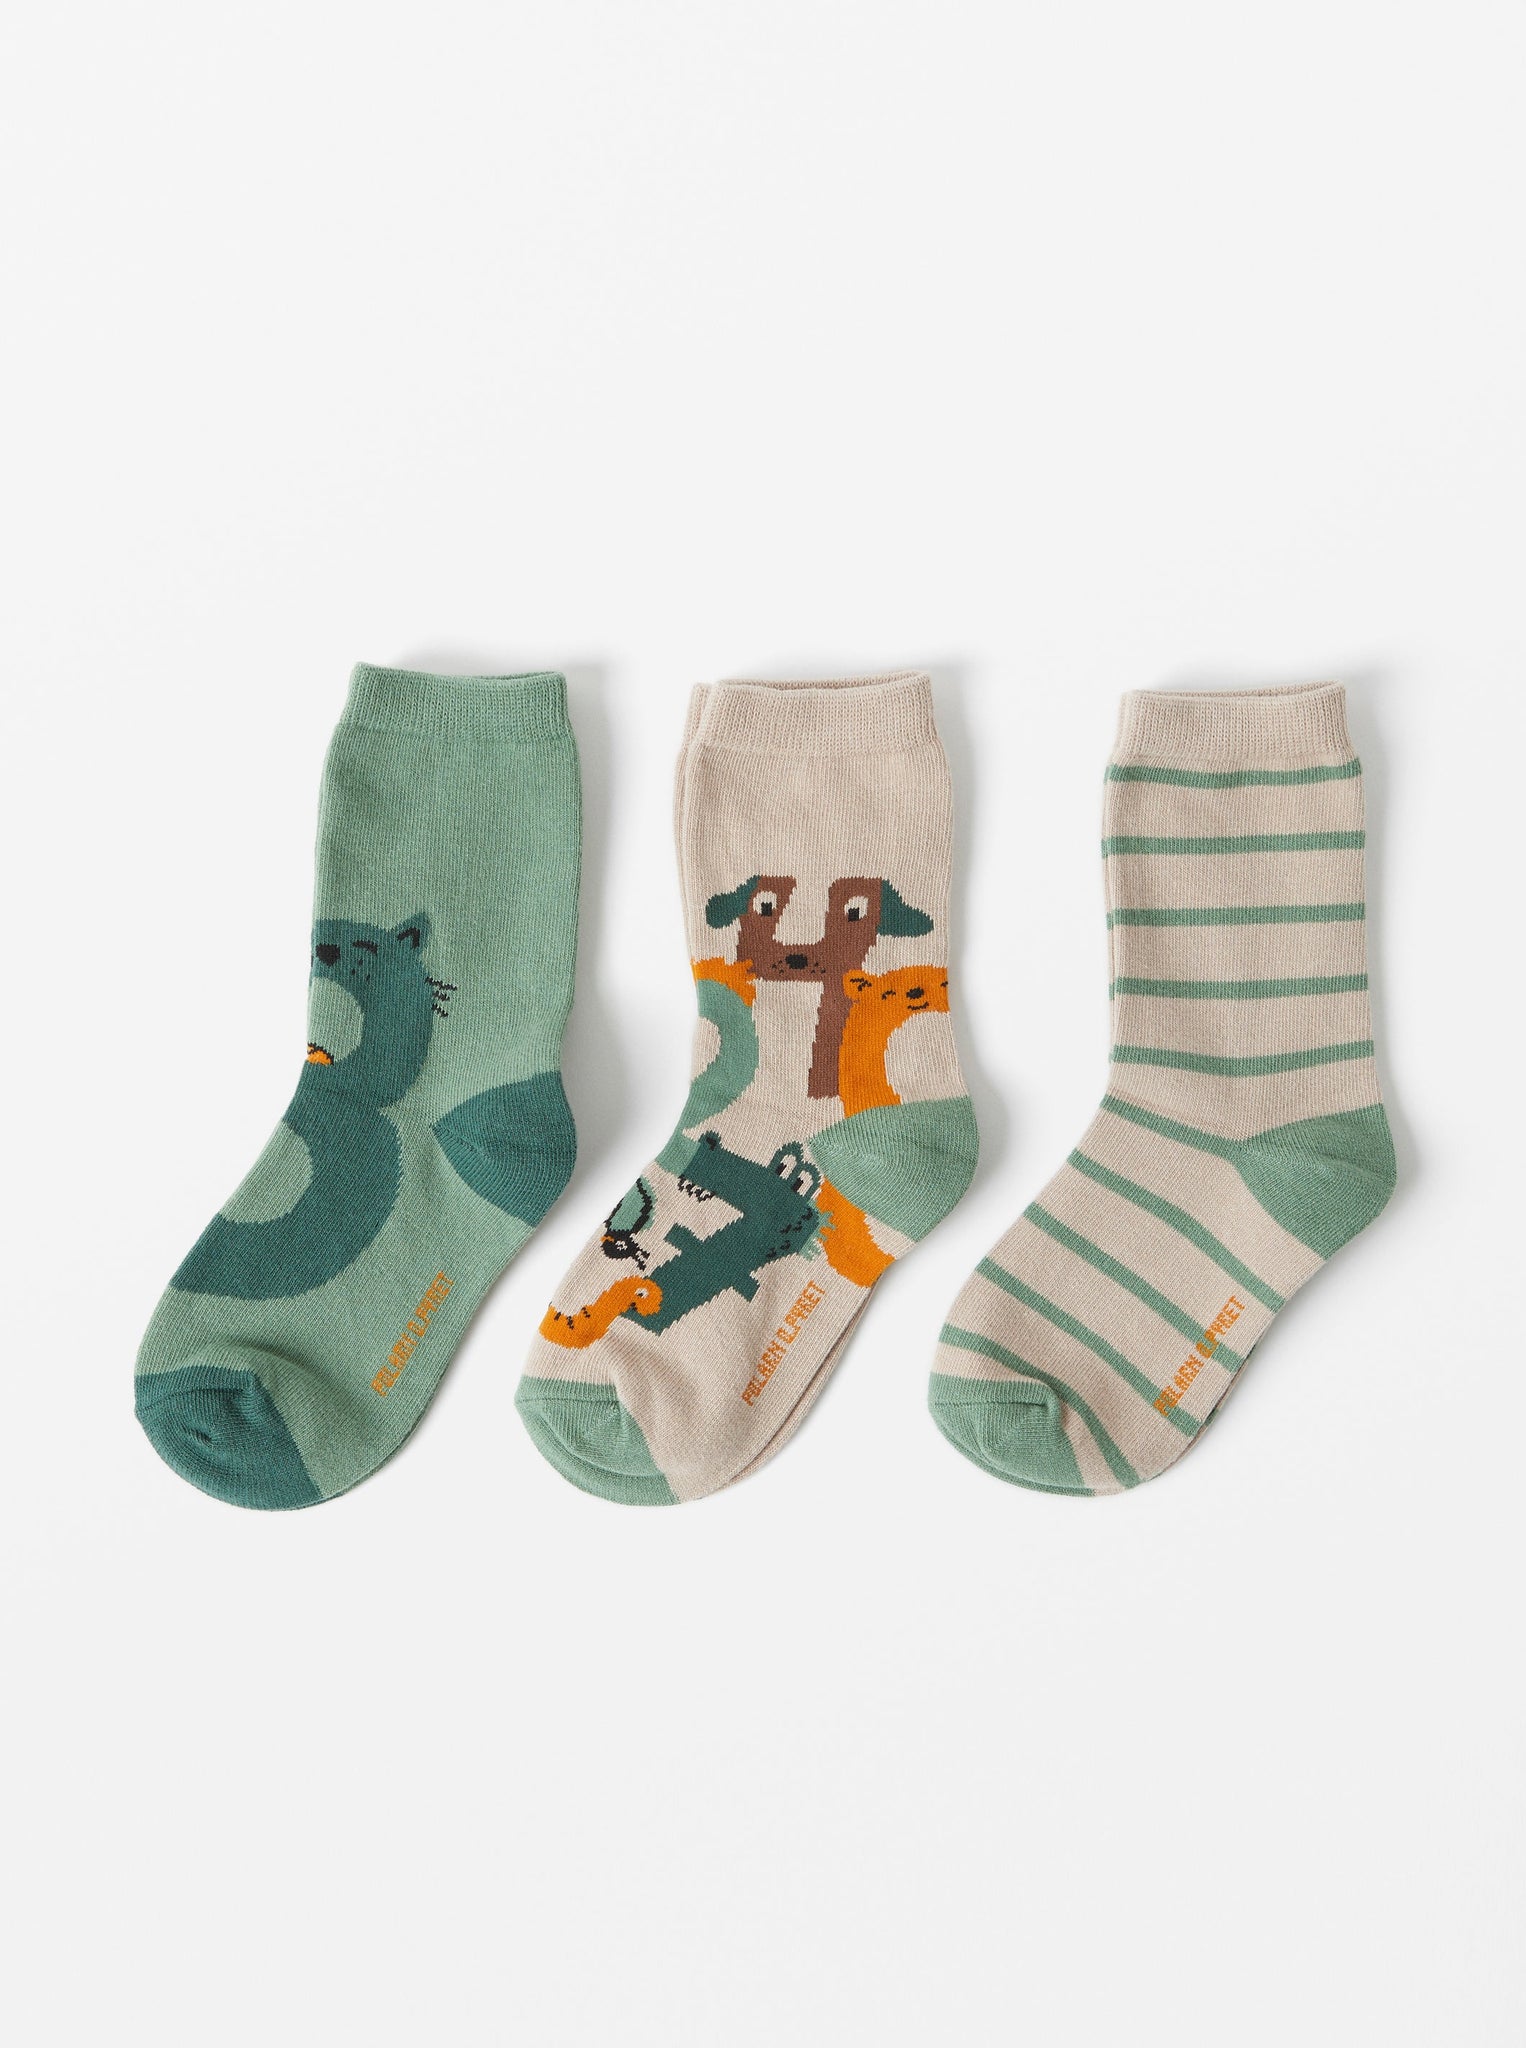 Green Cotton Kids Socks Multipack from the Polarn O. Pyret Kidswear collection. Nordic kids clothes made from sustainable sources.